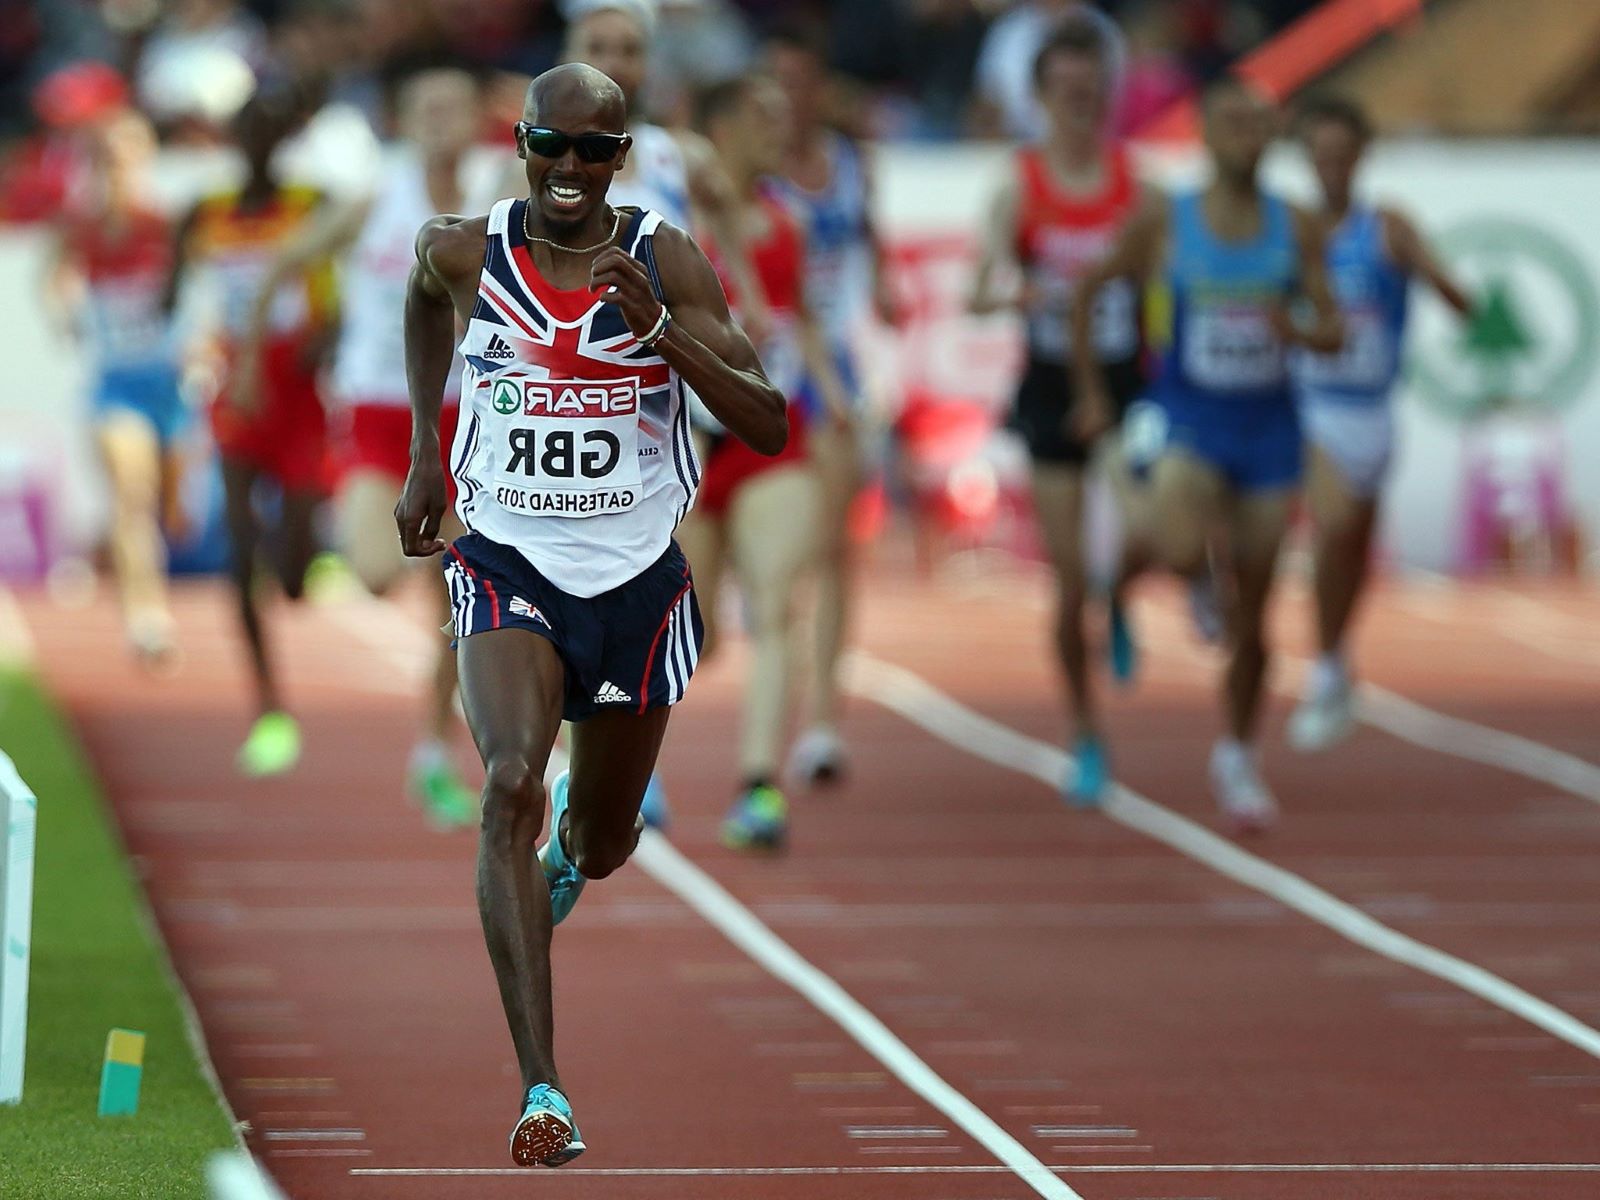 Mo Farah’s Speed: How Fast Does He Run?